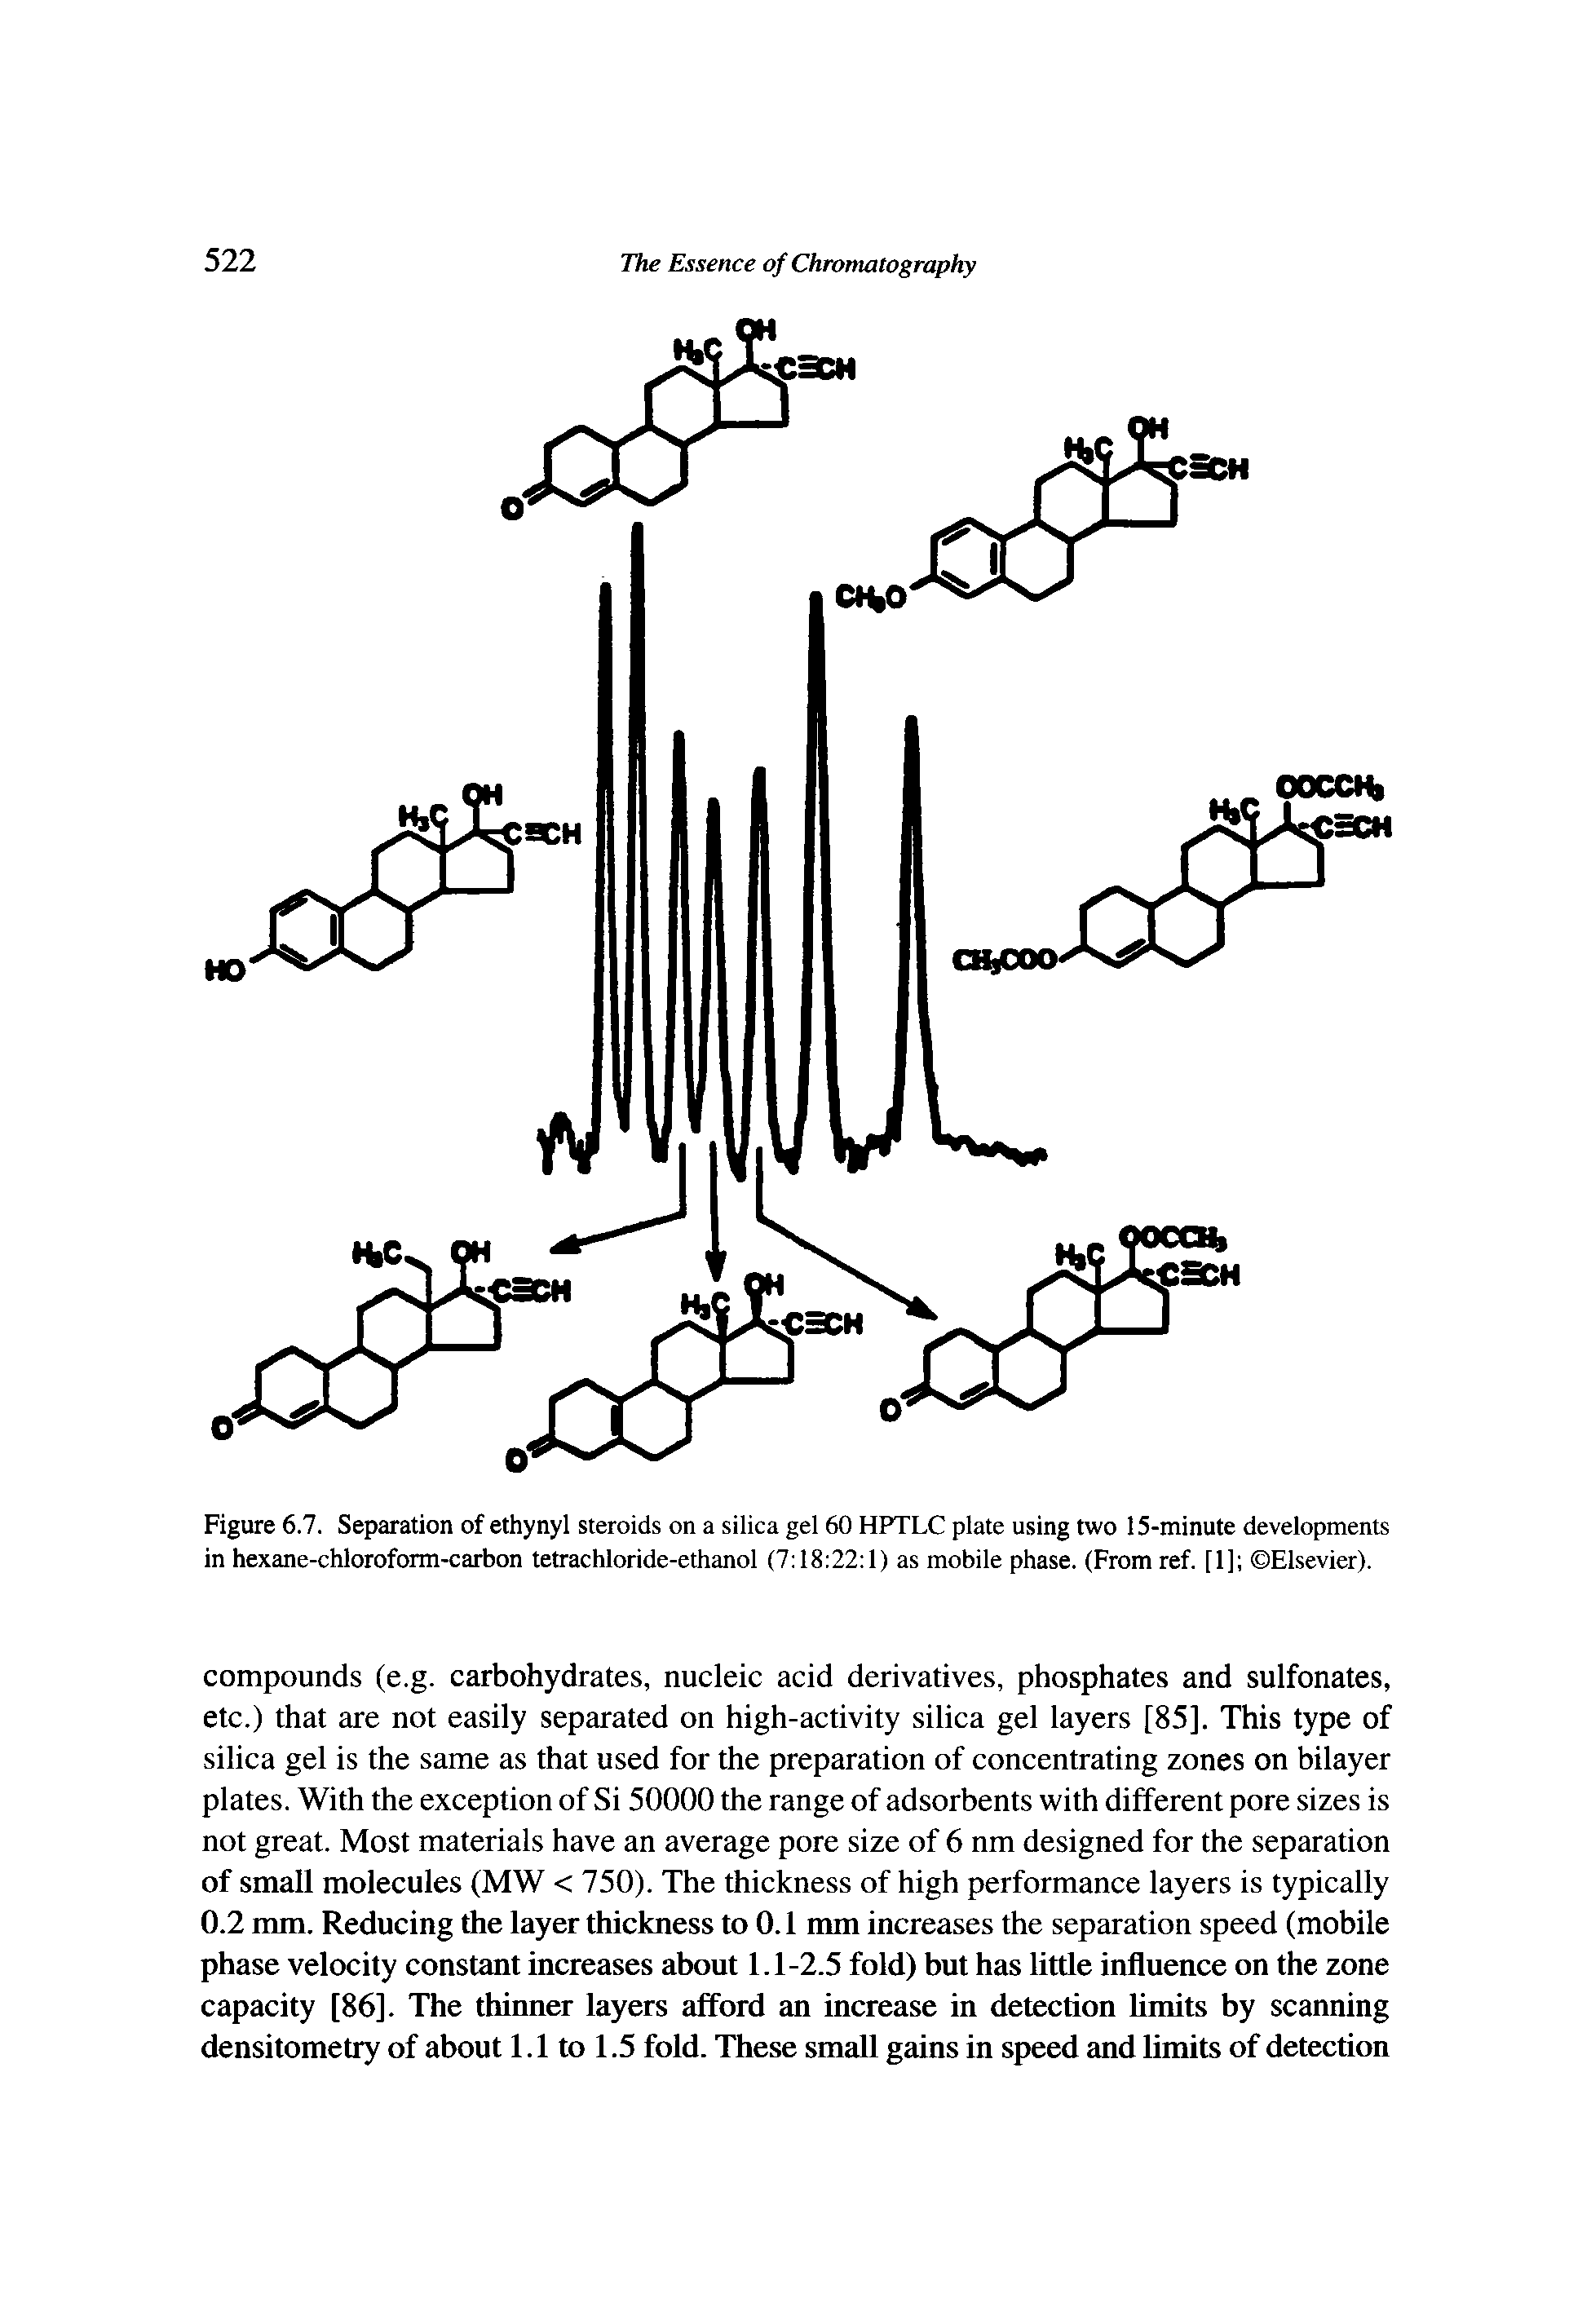 Figure 6.7. Separation of ethynyl steroids on a silica gel 60 HPTLC plate using two 15-minute developments in hexane-chloroform-carbon tetrachloride-ethanol (7 18 22 1) as mobile phase. (From ref. [1] Elsevier).